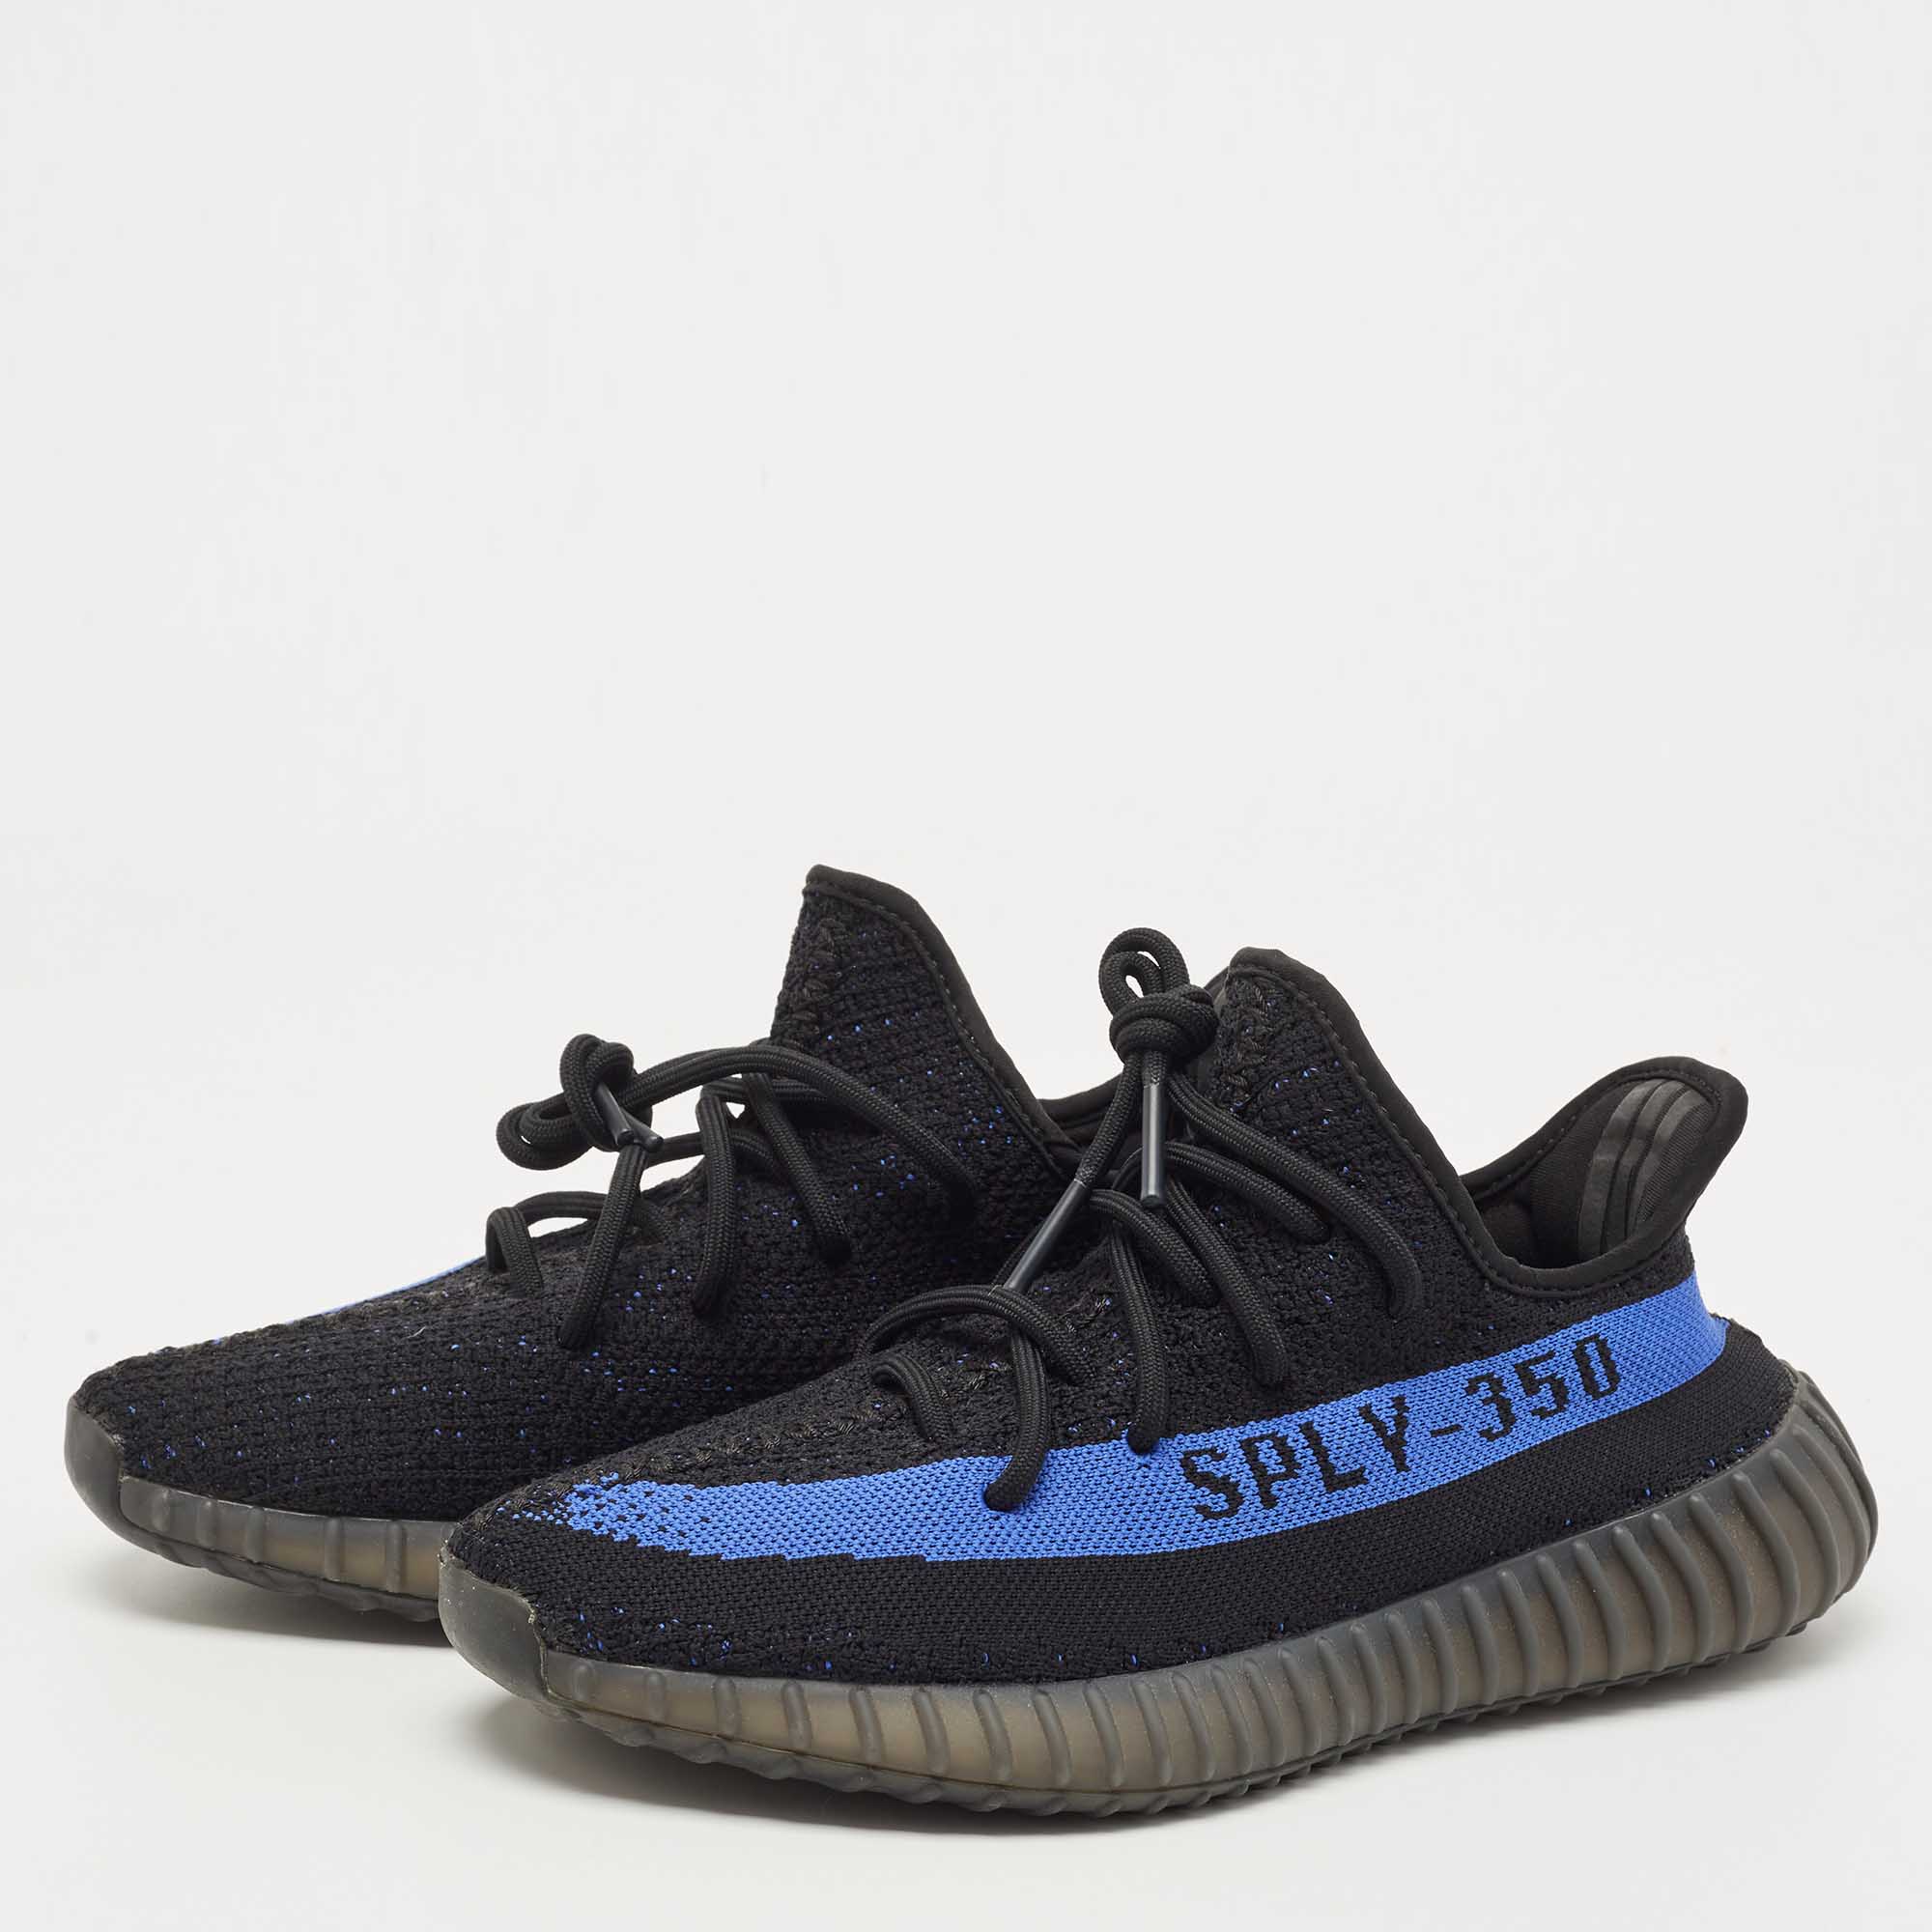 

Yeezy x Adidas Black/Blue Knit Fabric Boost 350 V2 Dazzling Blue Sneakers Size